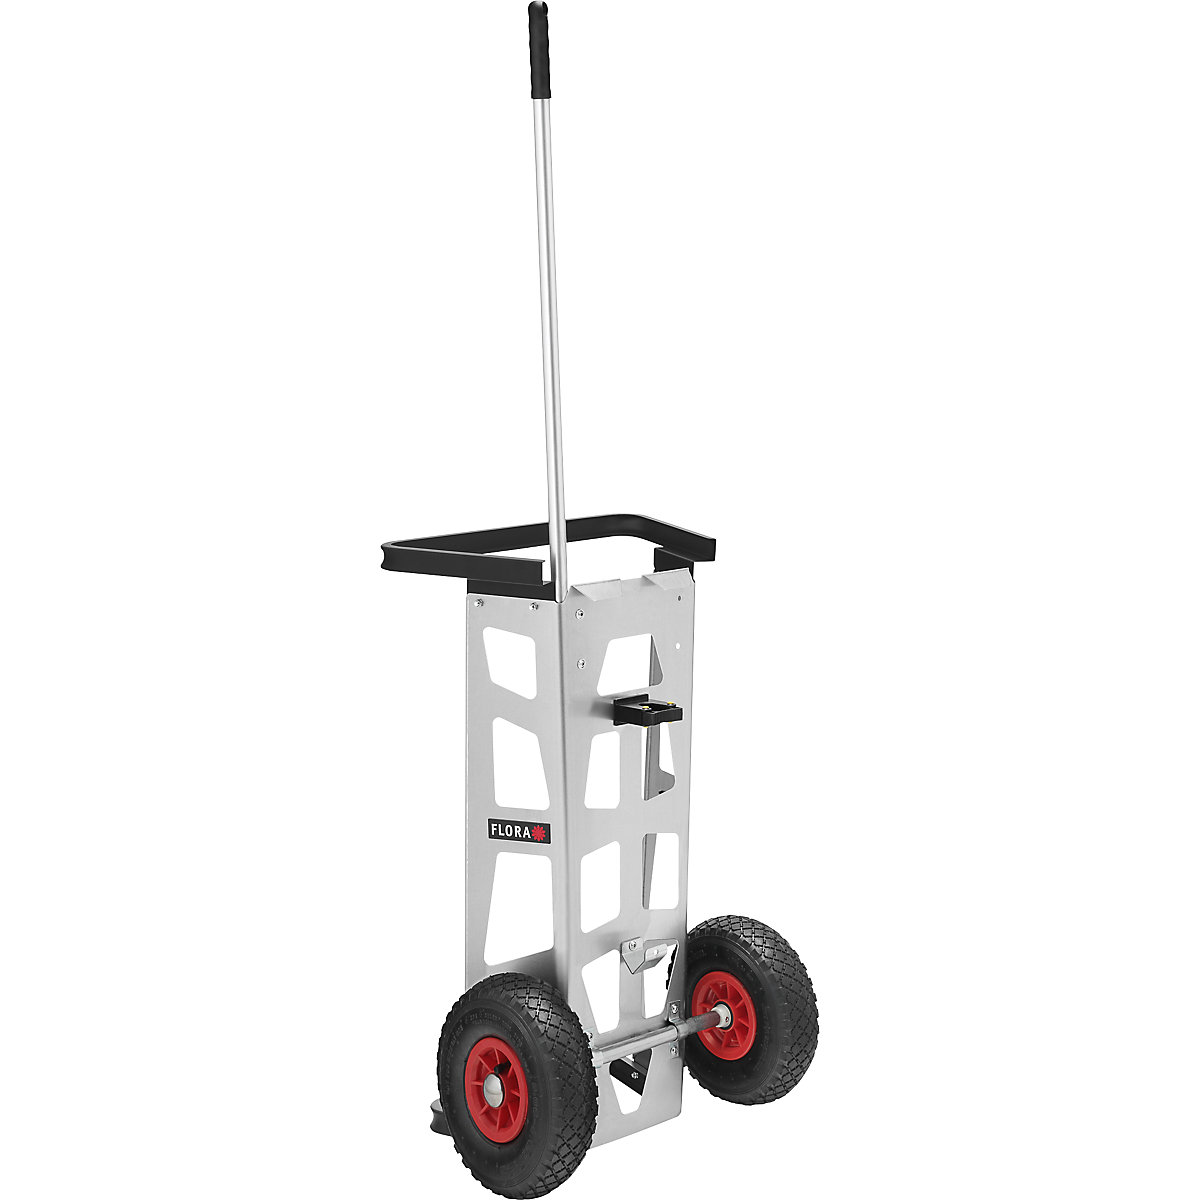 EASY waste collection trolley - FLORA